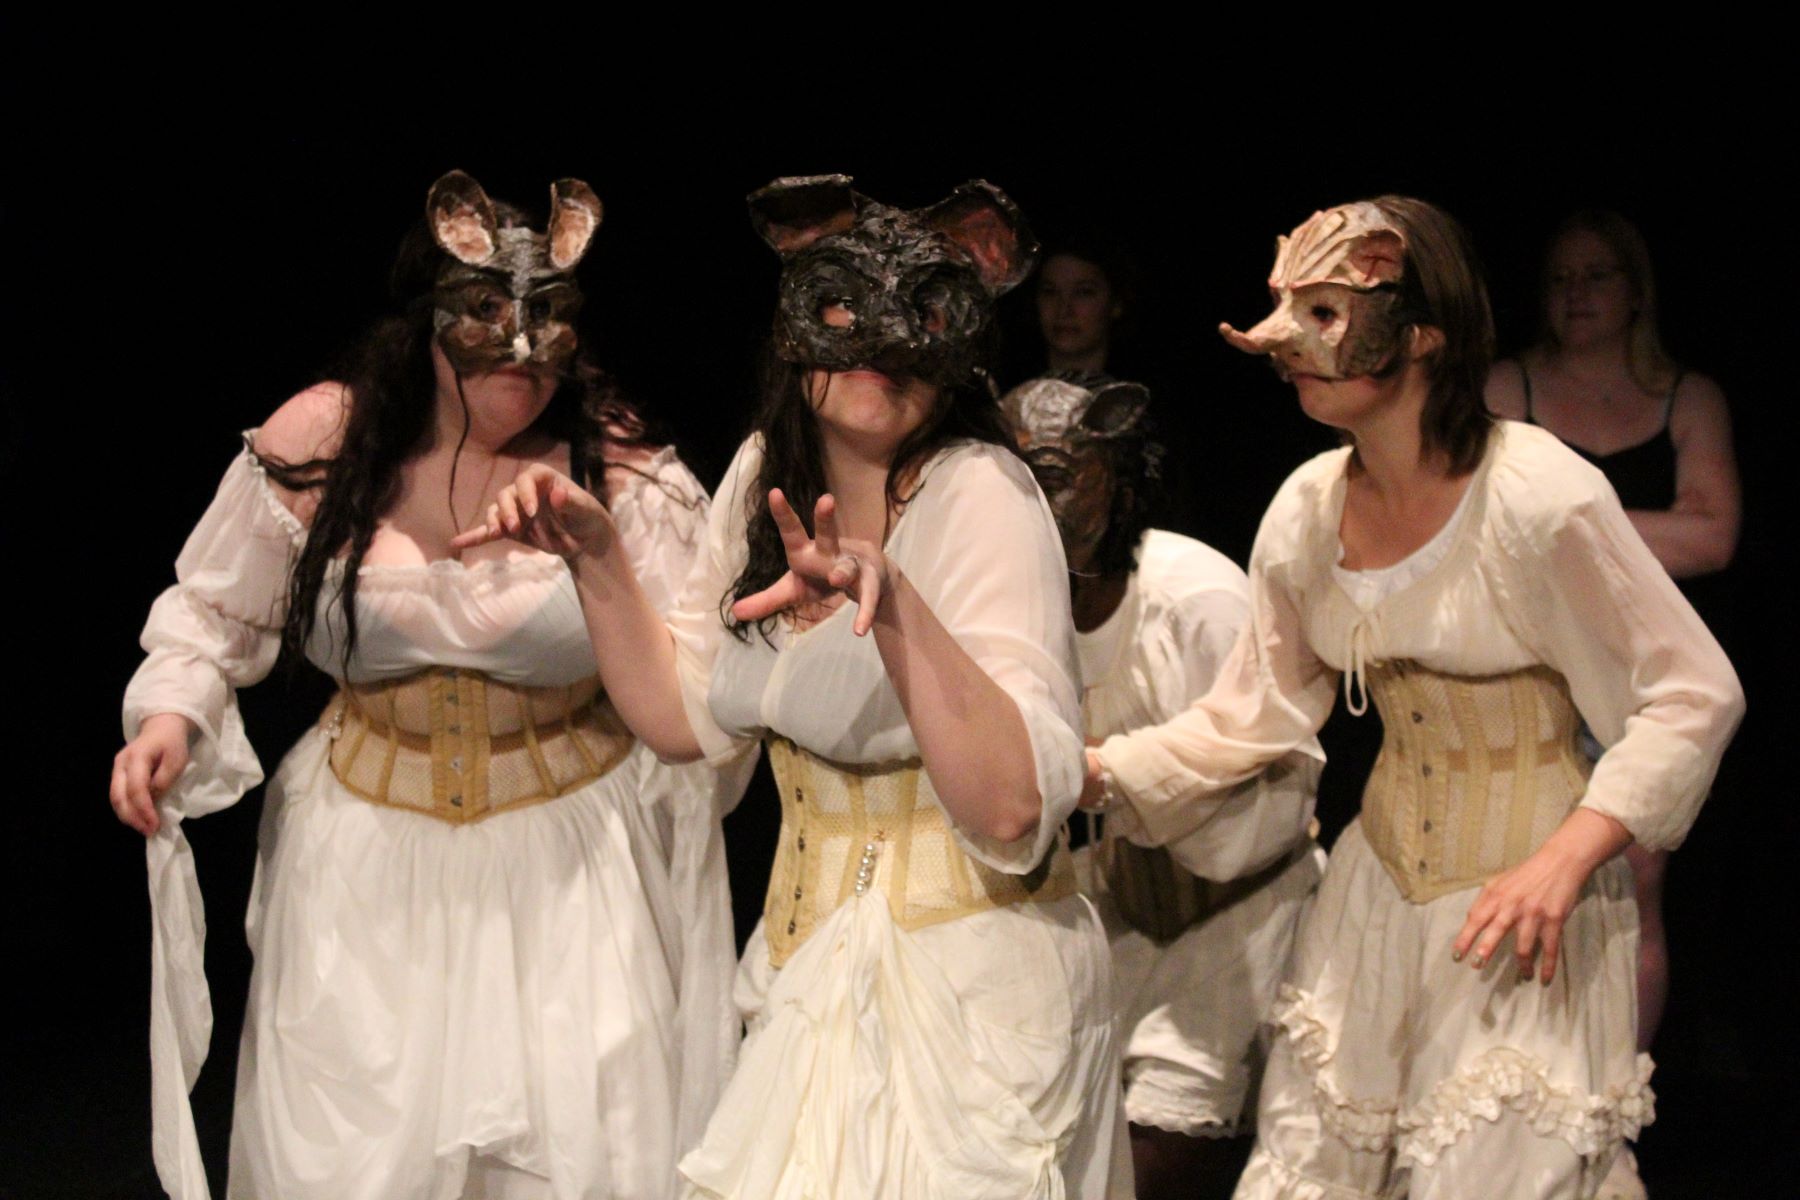 Women in white dresses and grotesque masks